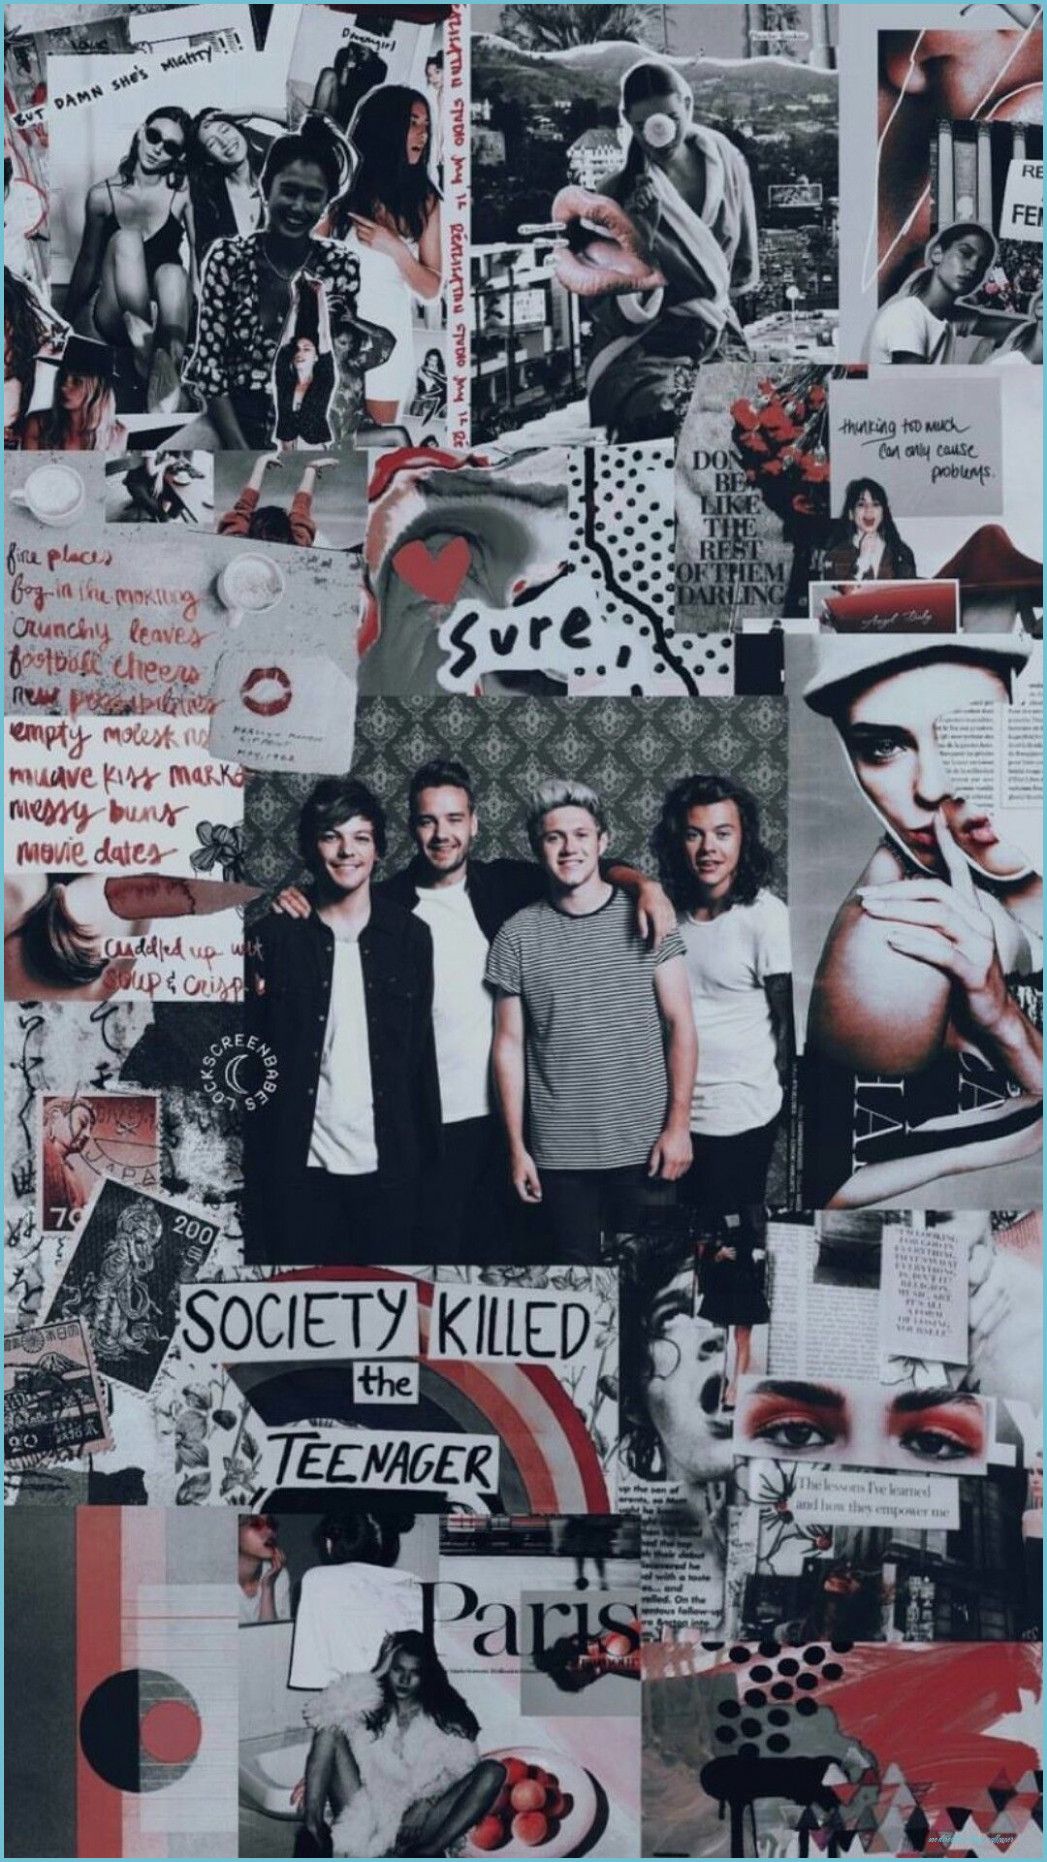 Aesthetic One Direction in 10 One direction wallpaper, One direction collage wallpaper